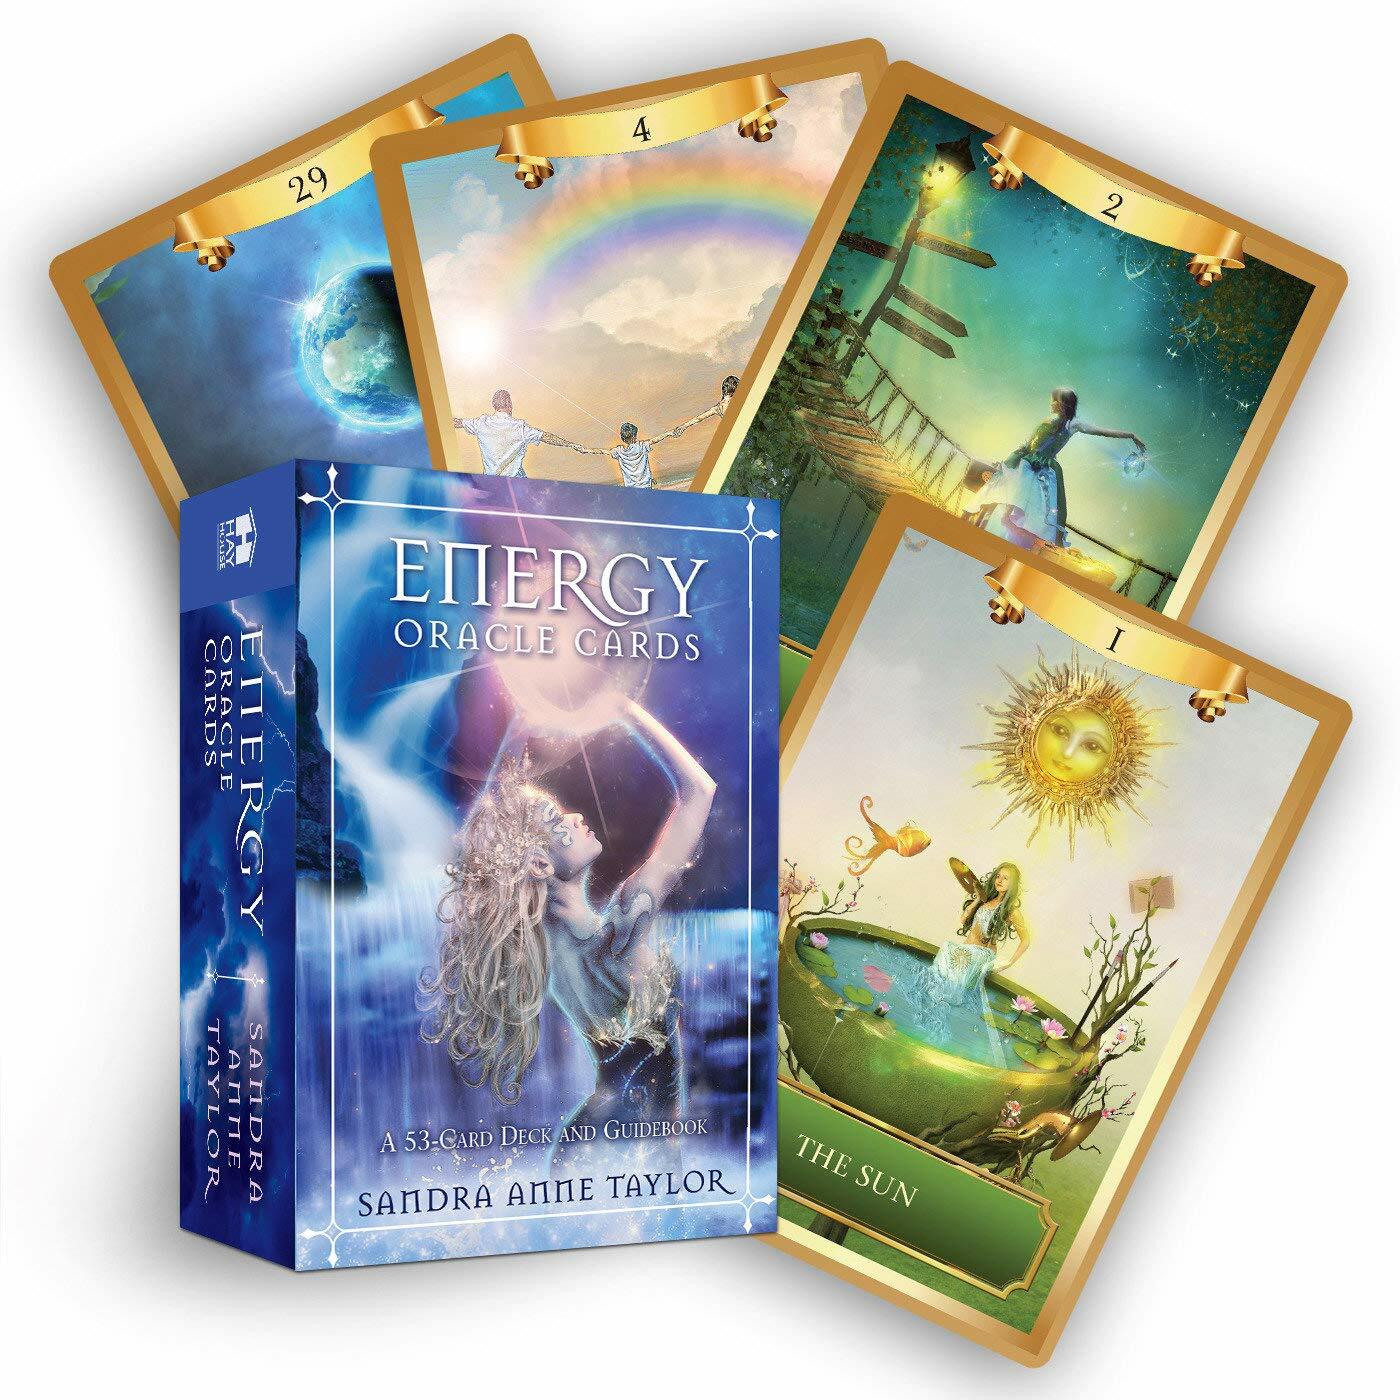 Energy Oracle Cards: A 53-Card Deck and Guidebook (Other)